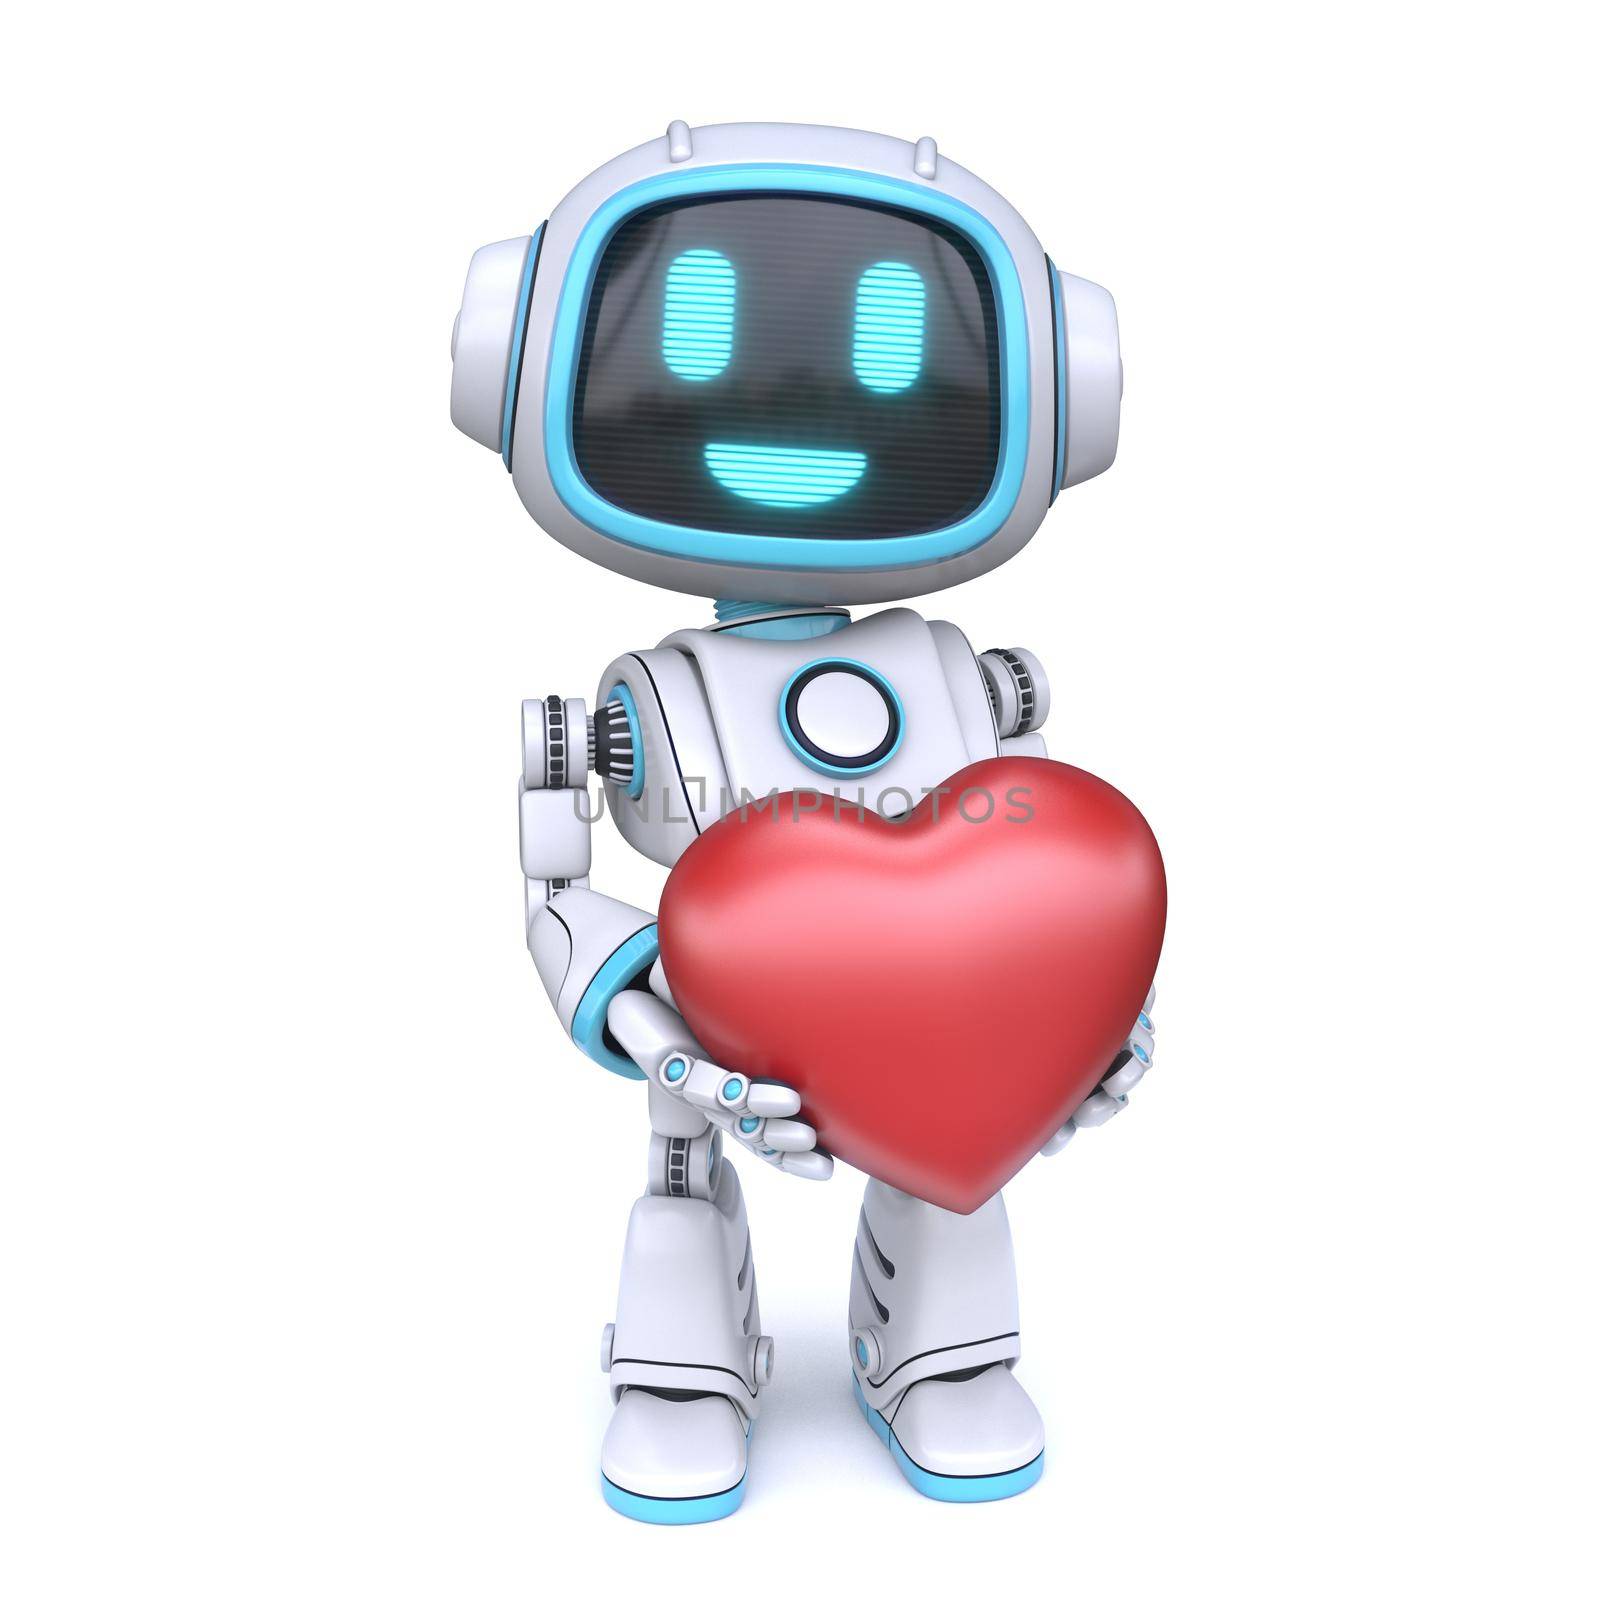 Cute blue robot holding red heart 3D rendering illustration isolated on white background